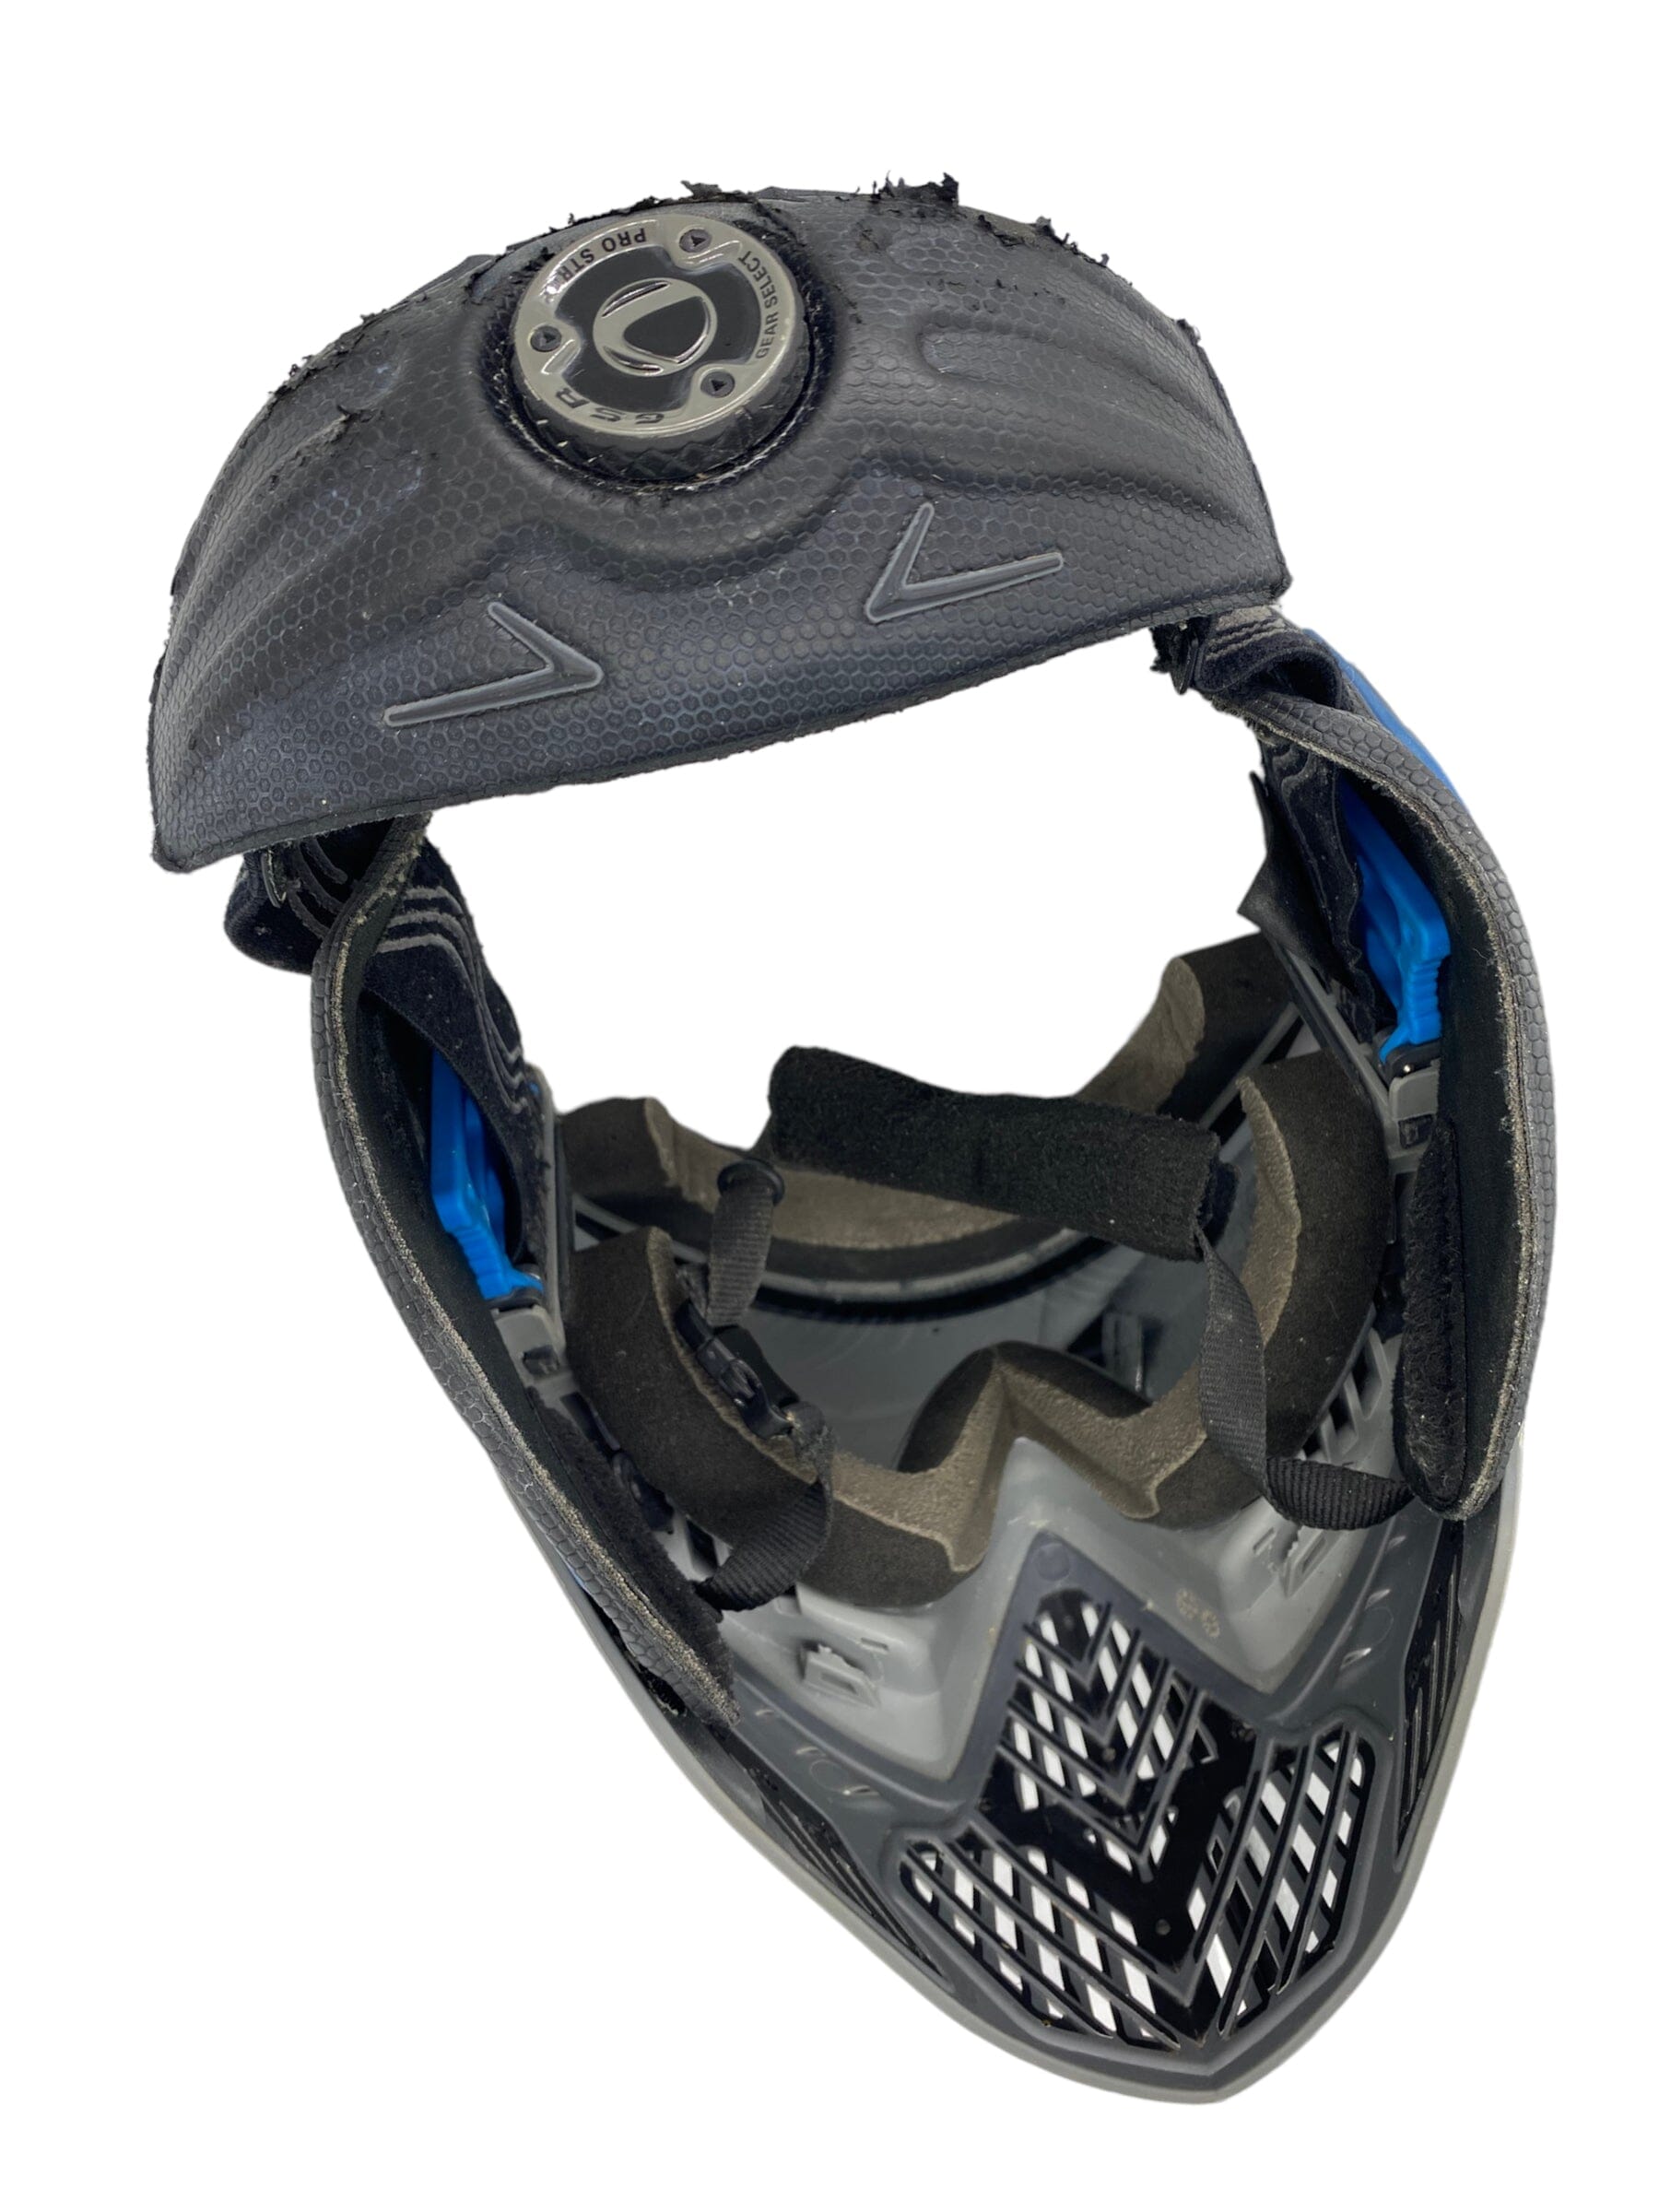 Used Dye i5 Invision Mask Goggle Paintball Gun from CPXBrosPaintball Buy/Sell/Trade Paintball Markers, Paintball Hoppers, Paintball Masks, and Hormesis Headbands